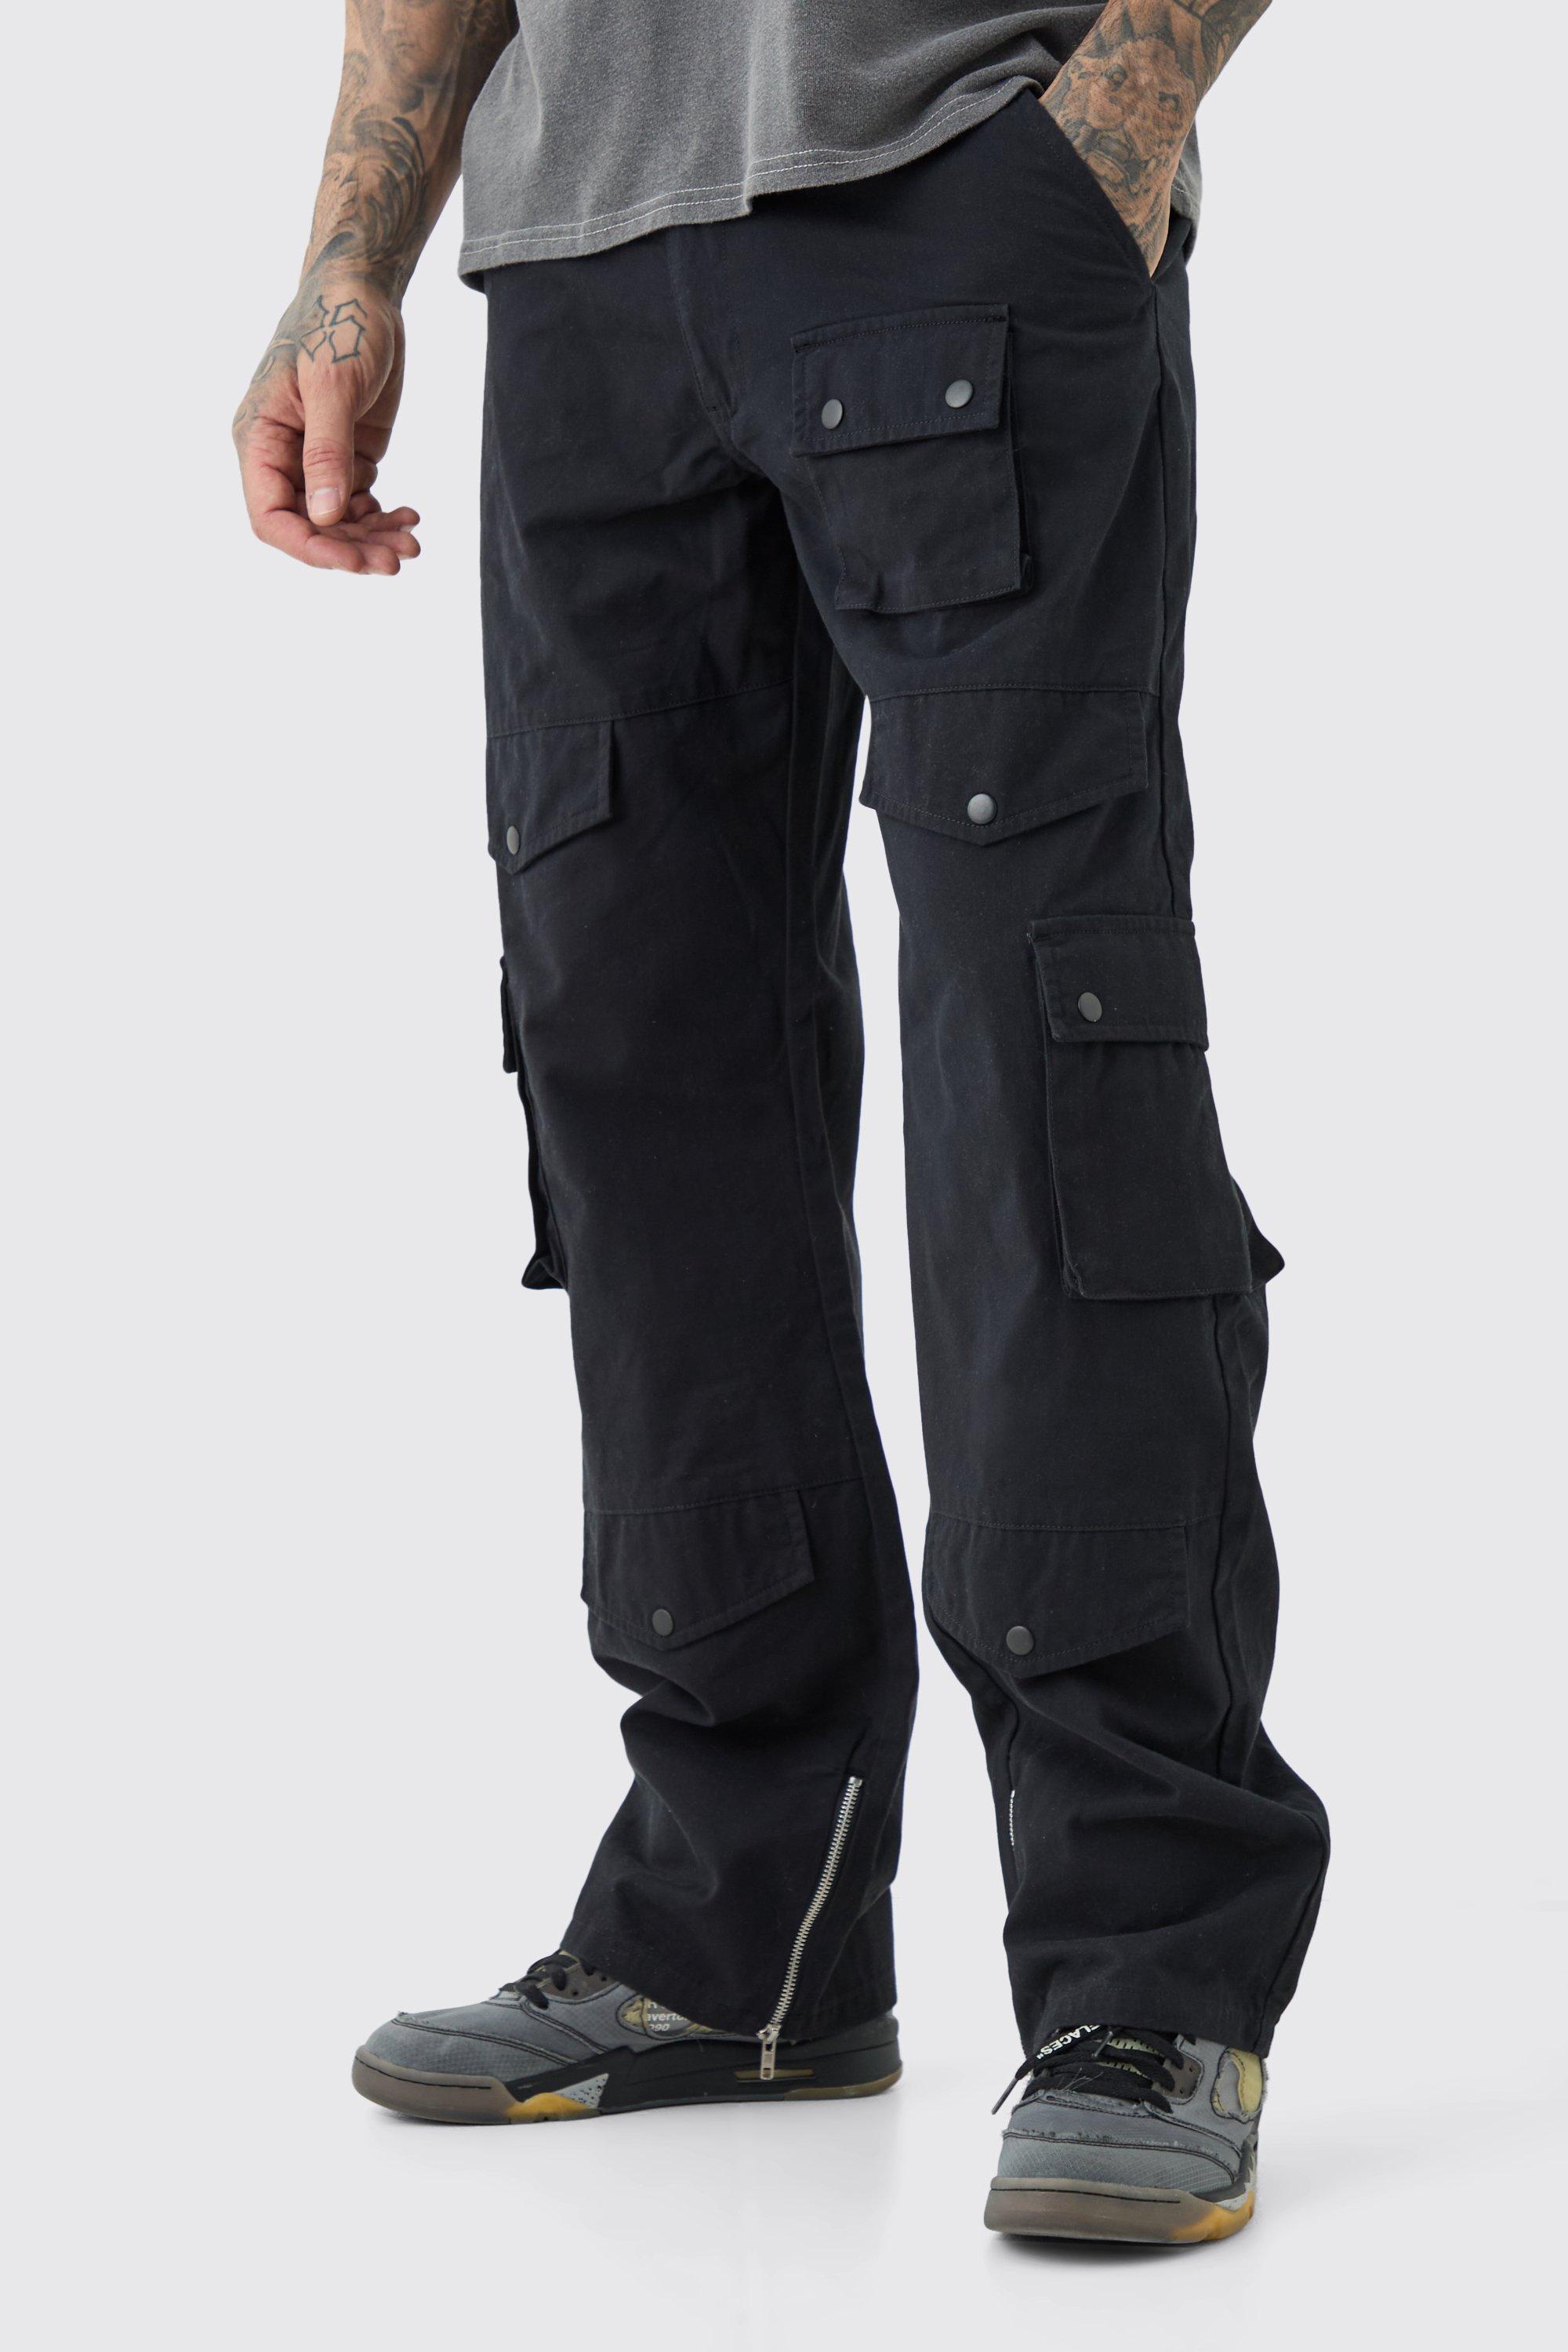 Qopobobo Joggers for Men Cargo Pants for Men Relaxed Palestine